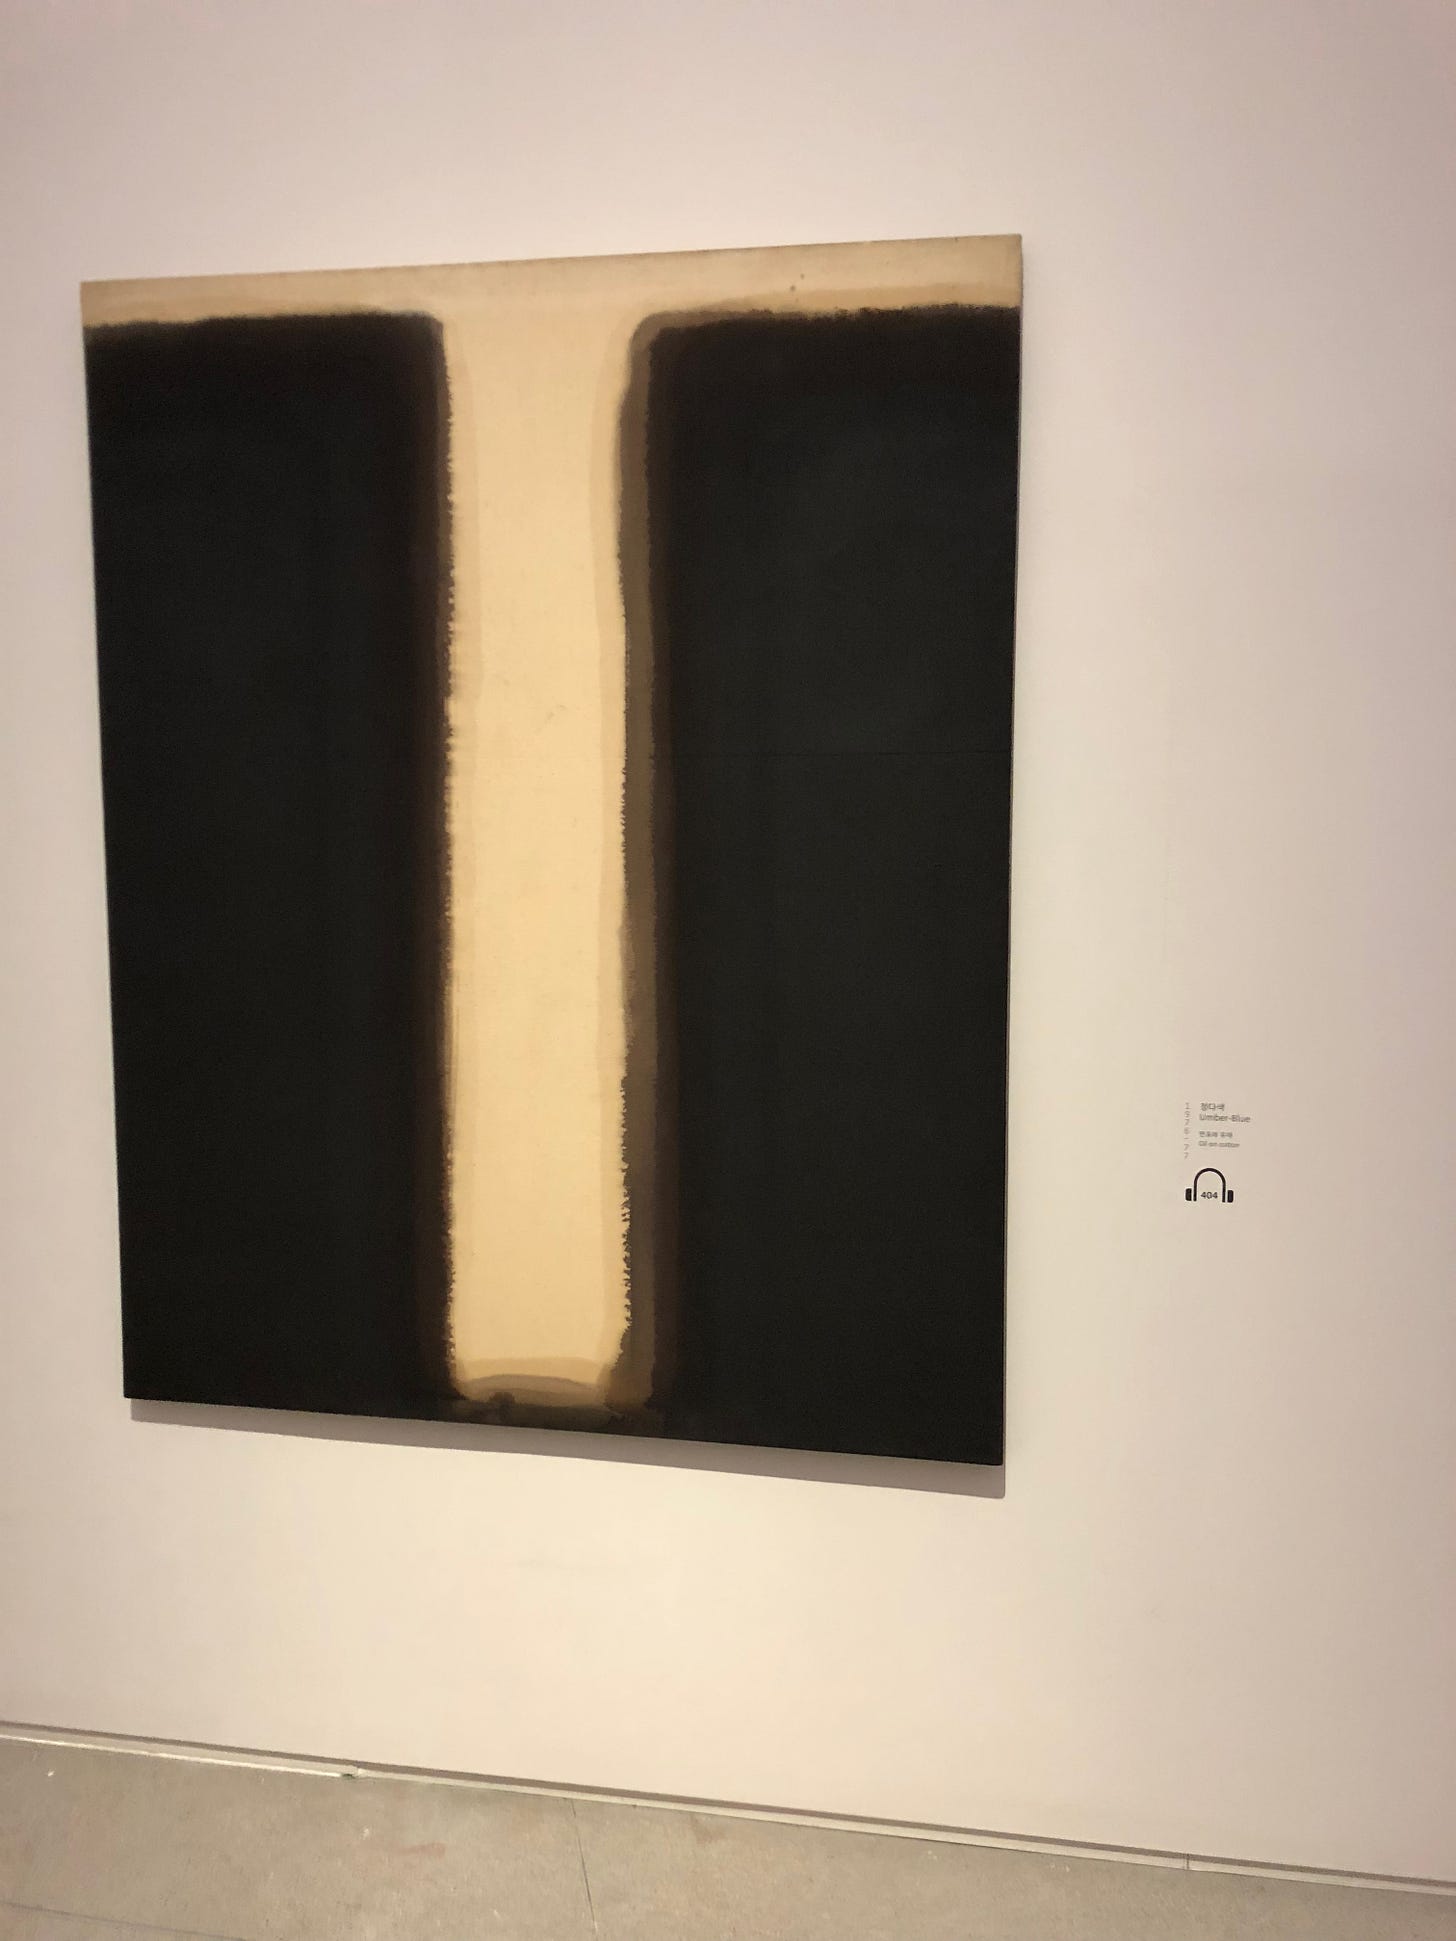 Umber-Blue by Yun Hyong-keun. The painting is oil on cotton. Two simple black bars tower over a narrow path, looking like a gate. The edges of the bar blur, making the gate seem like it’s just now opening, or closing. The path sprawled out before you is inviting but also holds a quiet menace of uncertainty.